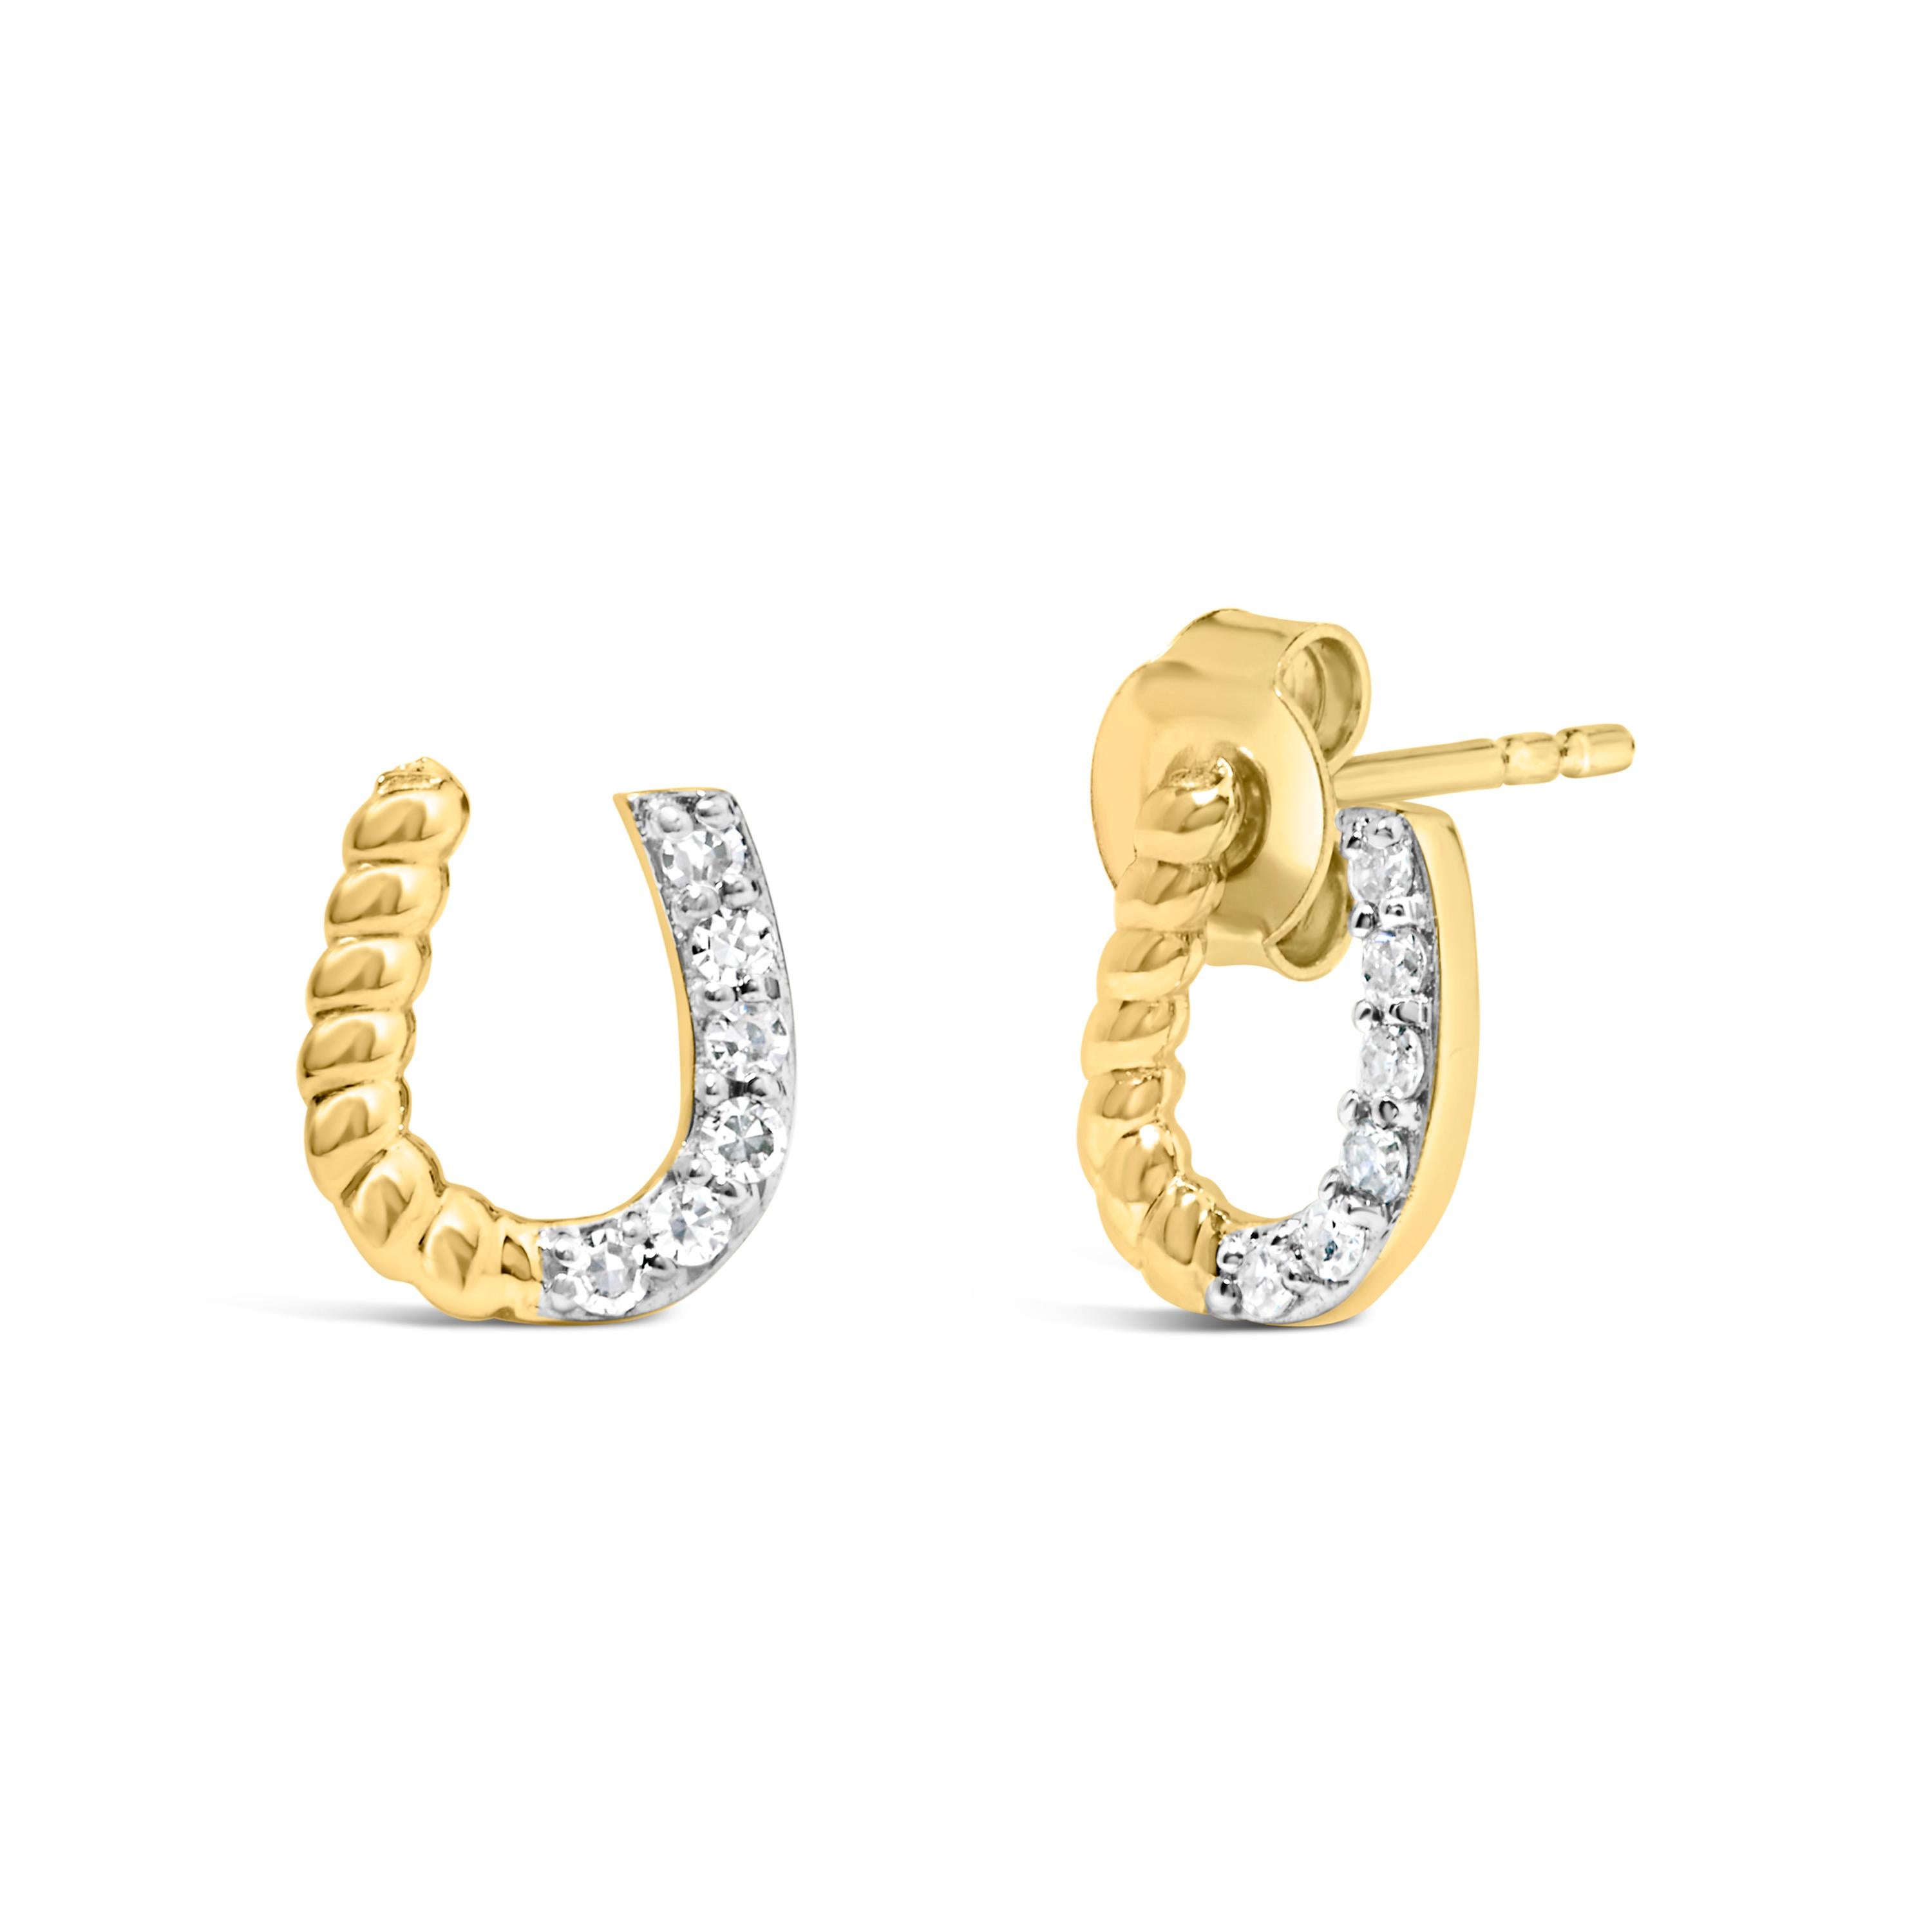 Introducing a mesmerizing pair of 14K Yellow Gold Stud Earrings that will surely captivate your heart! Immerse yourself in the allure of these exquisite earrings, adorned with 12 dazzling round diamonds. Crafted with love and precision, the braided